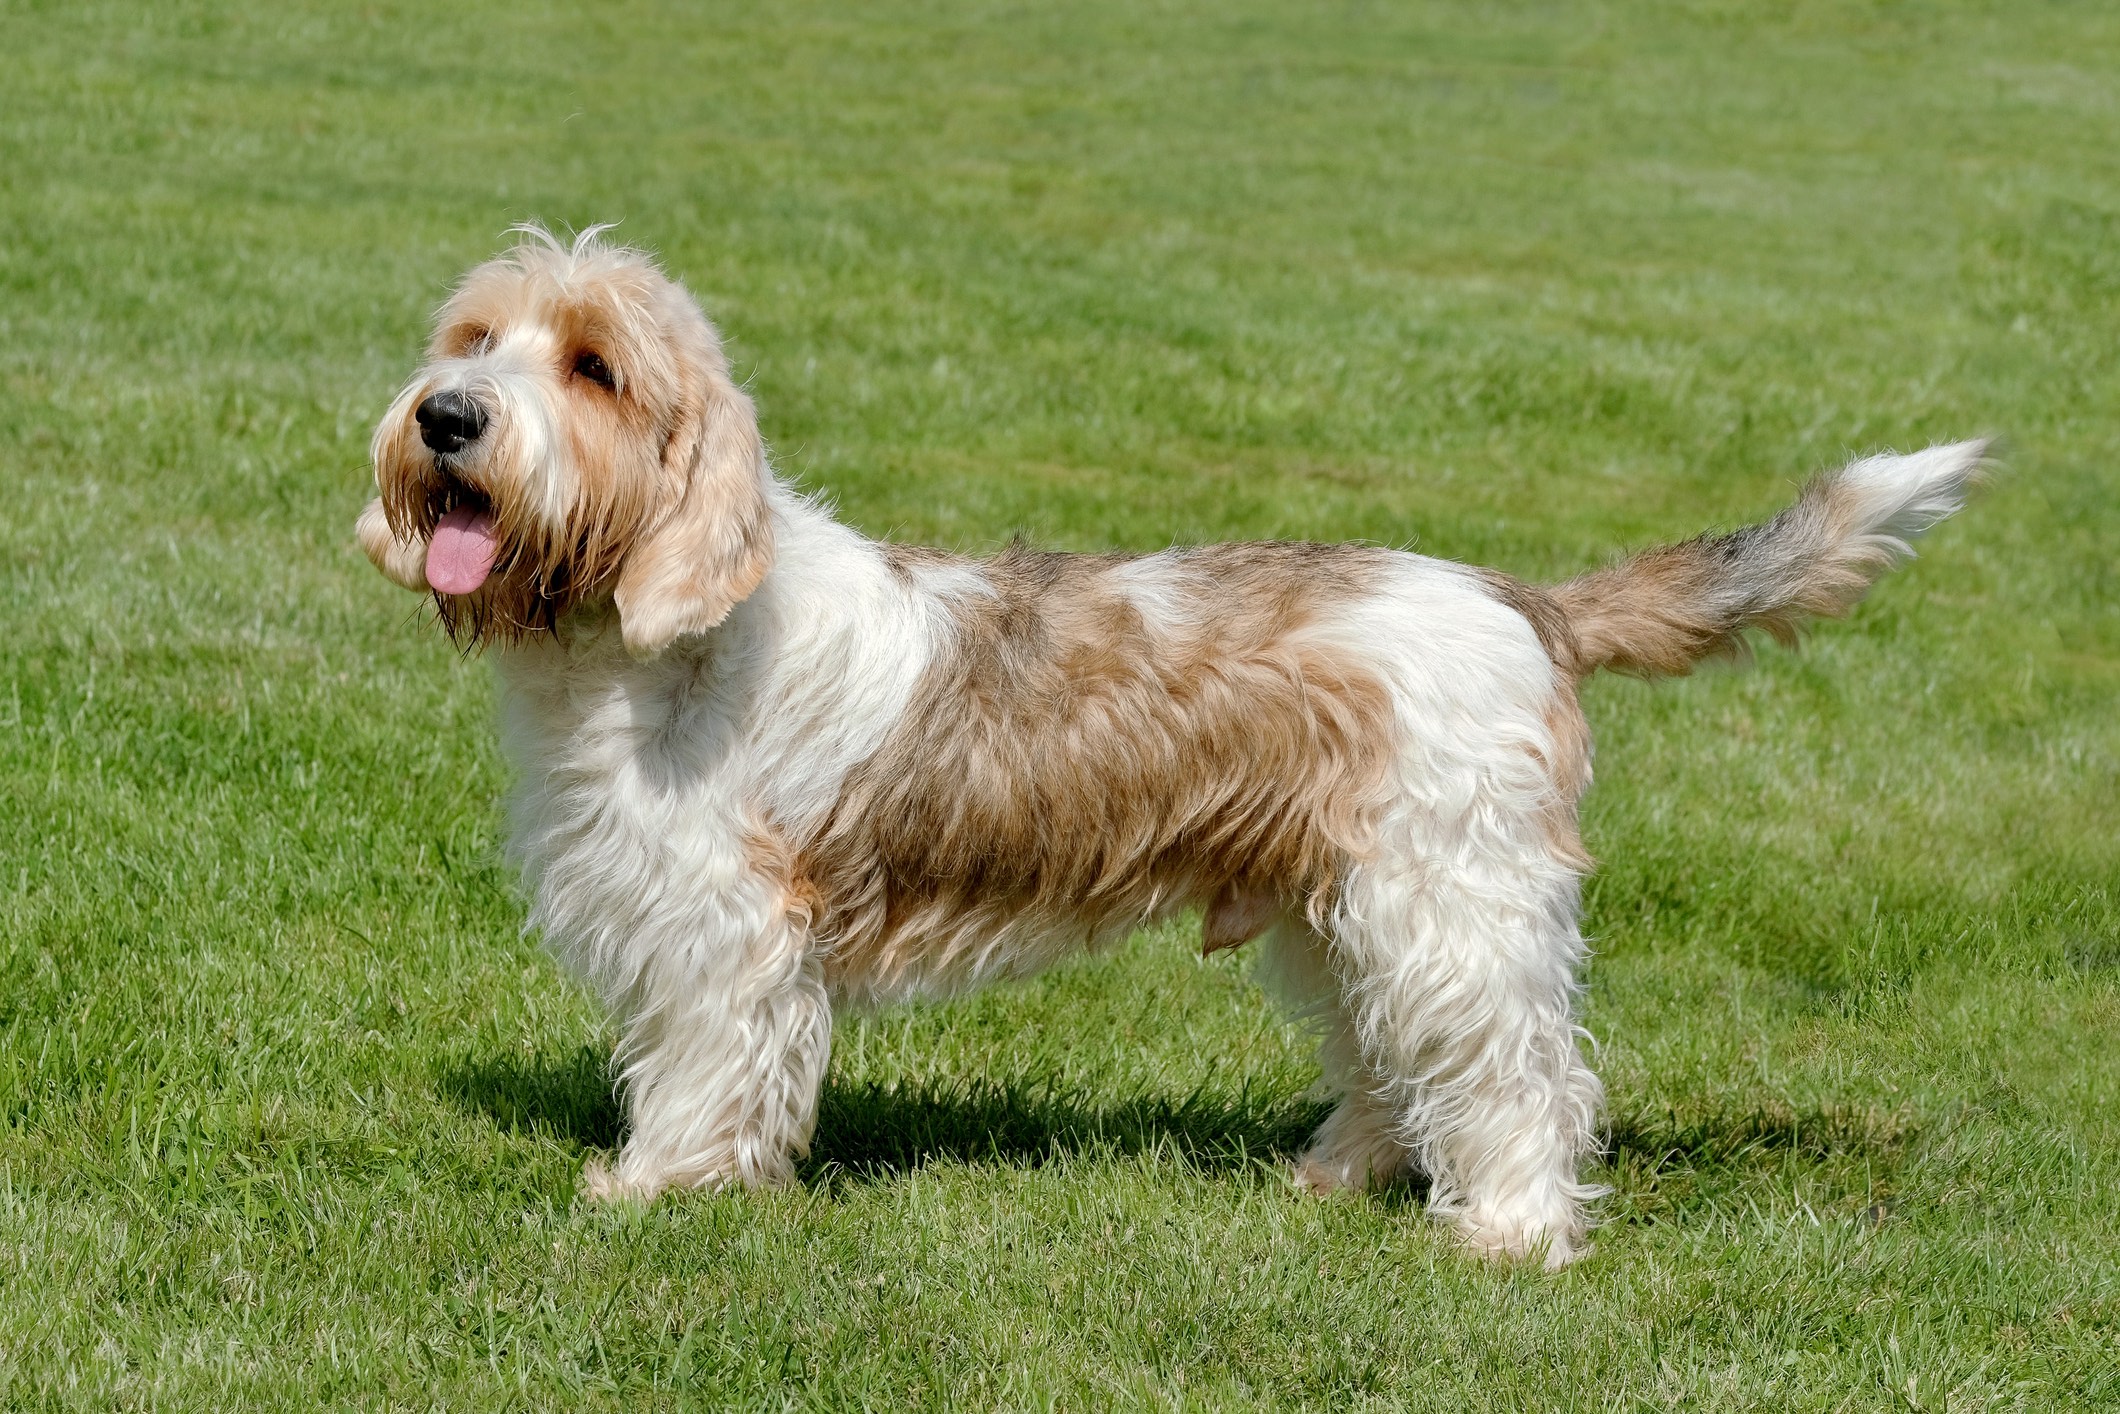 white and brown petit basset griffon vendeen dog standing in grass